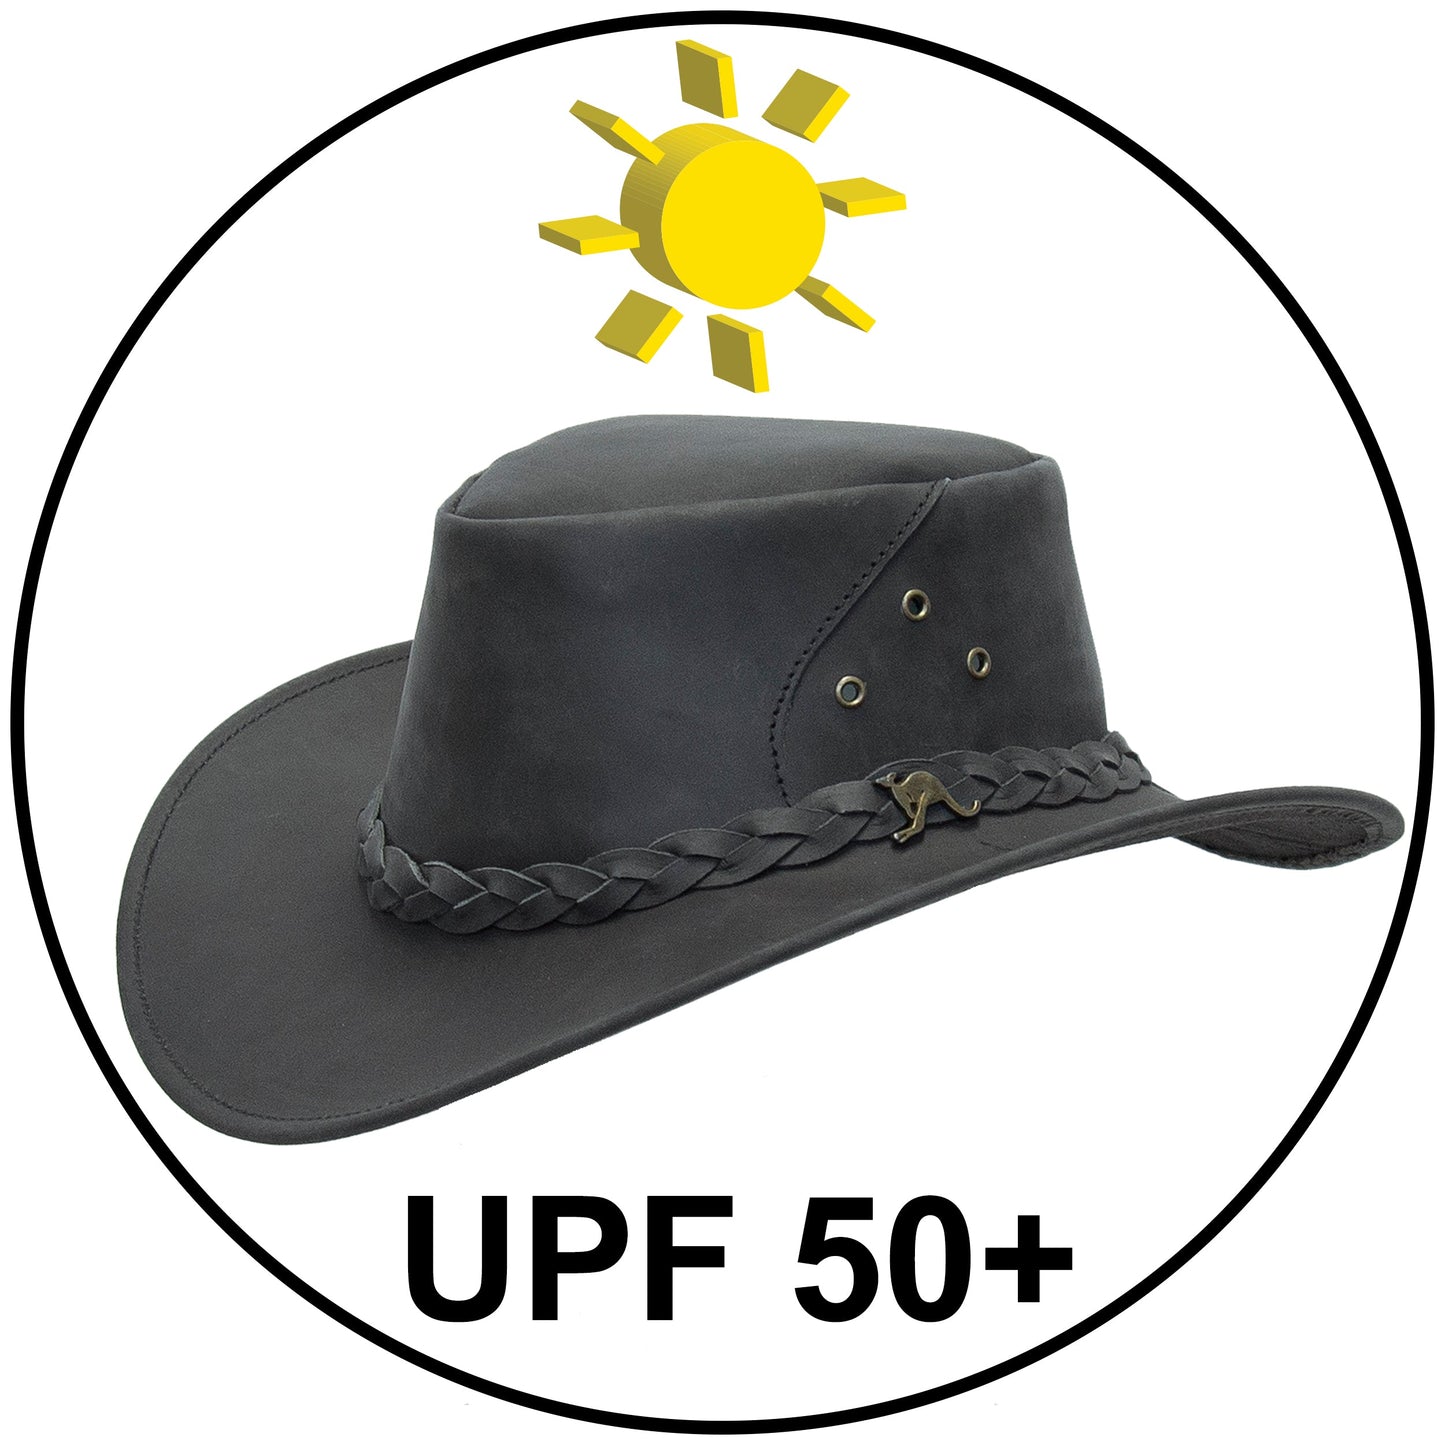 Tire break | Ultra-light cowboy hat for women and men made of kangaroo leather